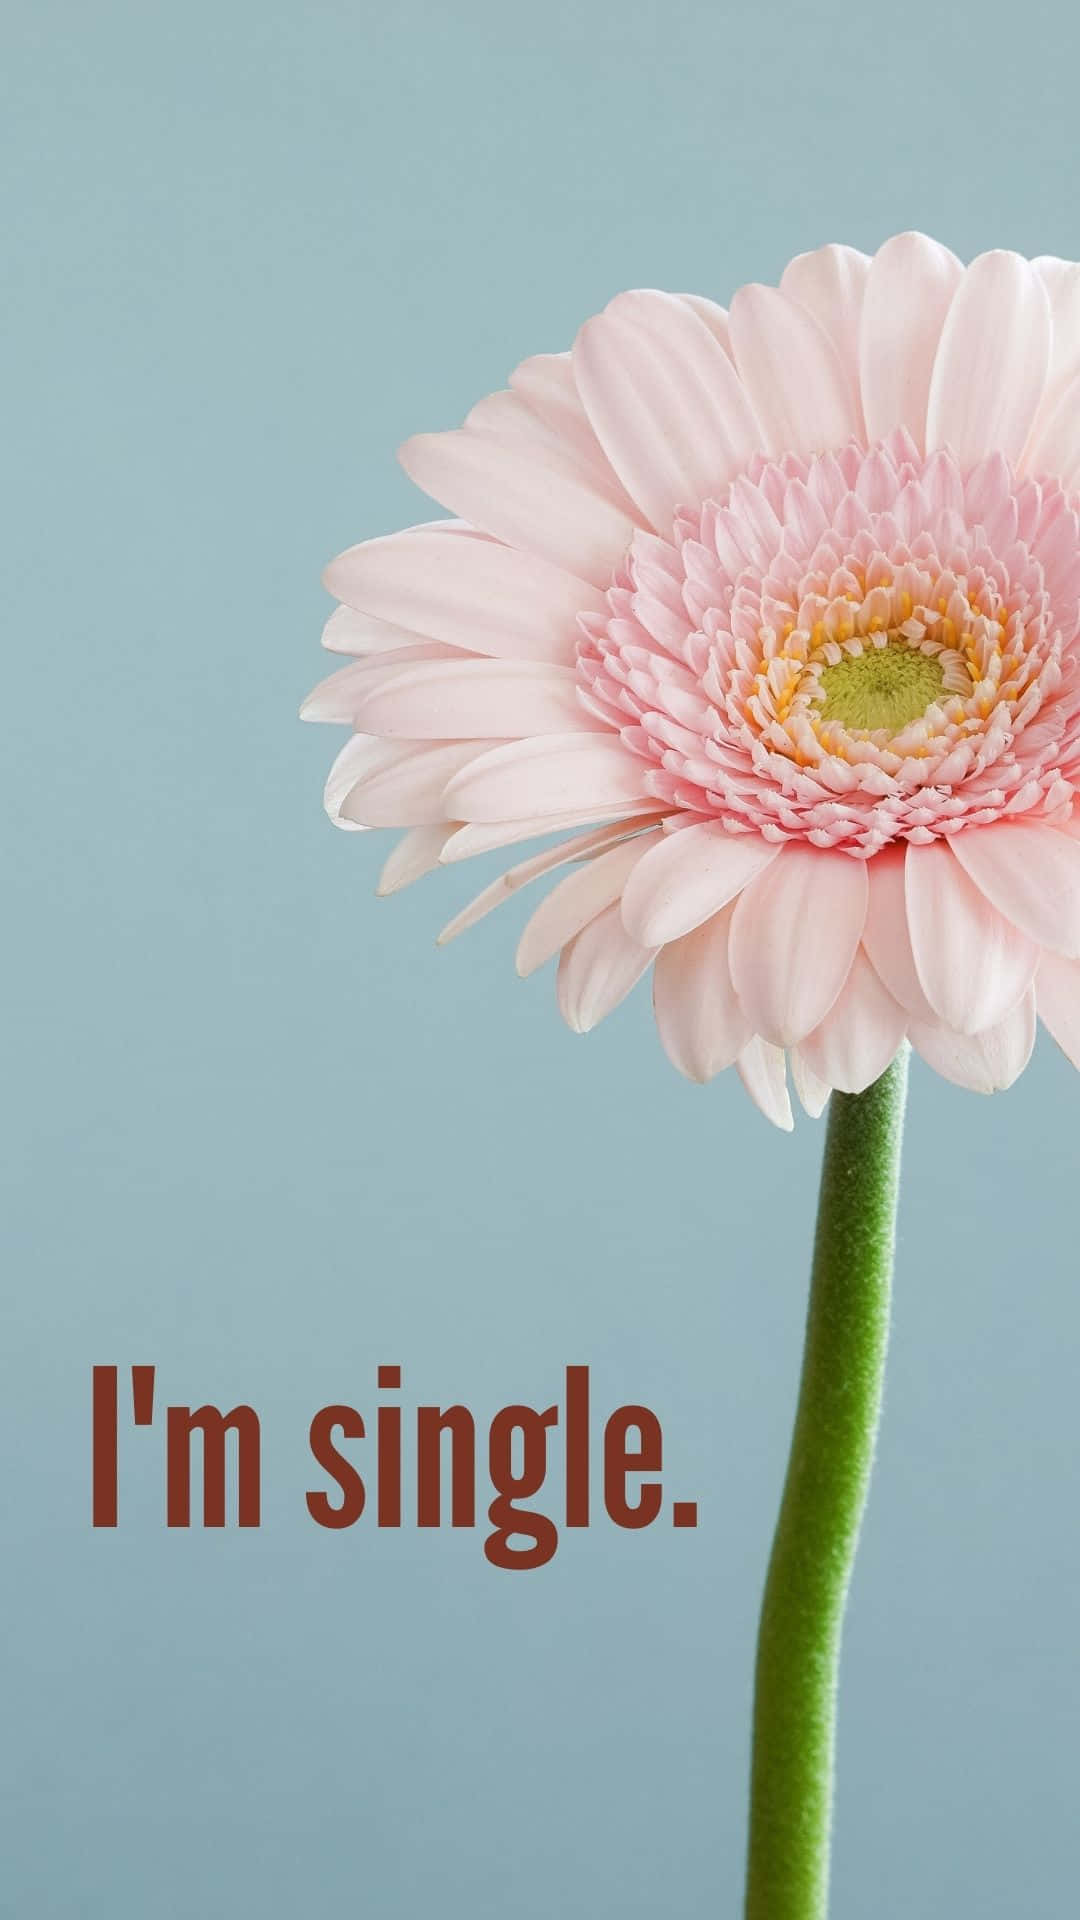 Live your life to the fullest and be single!